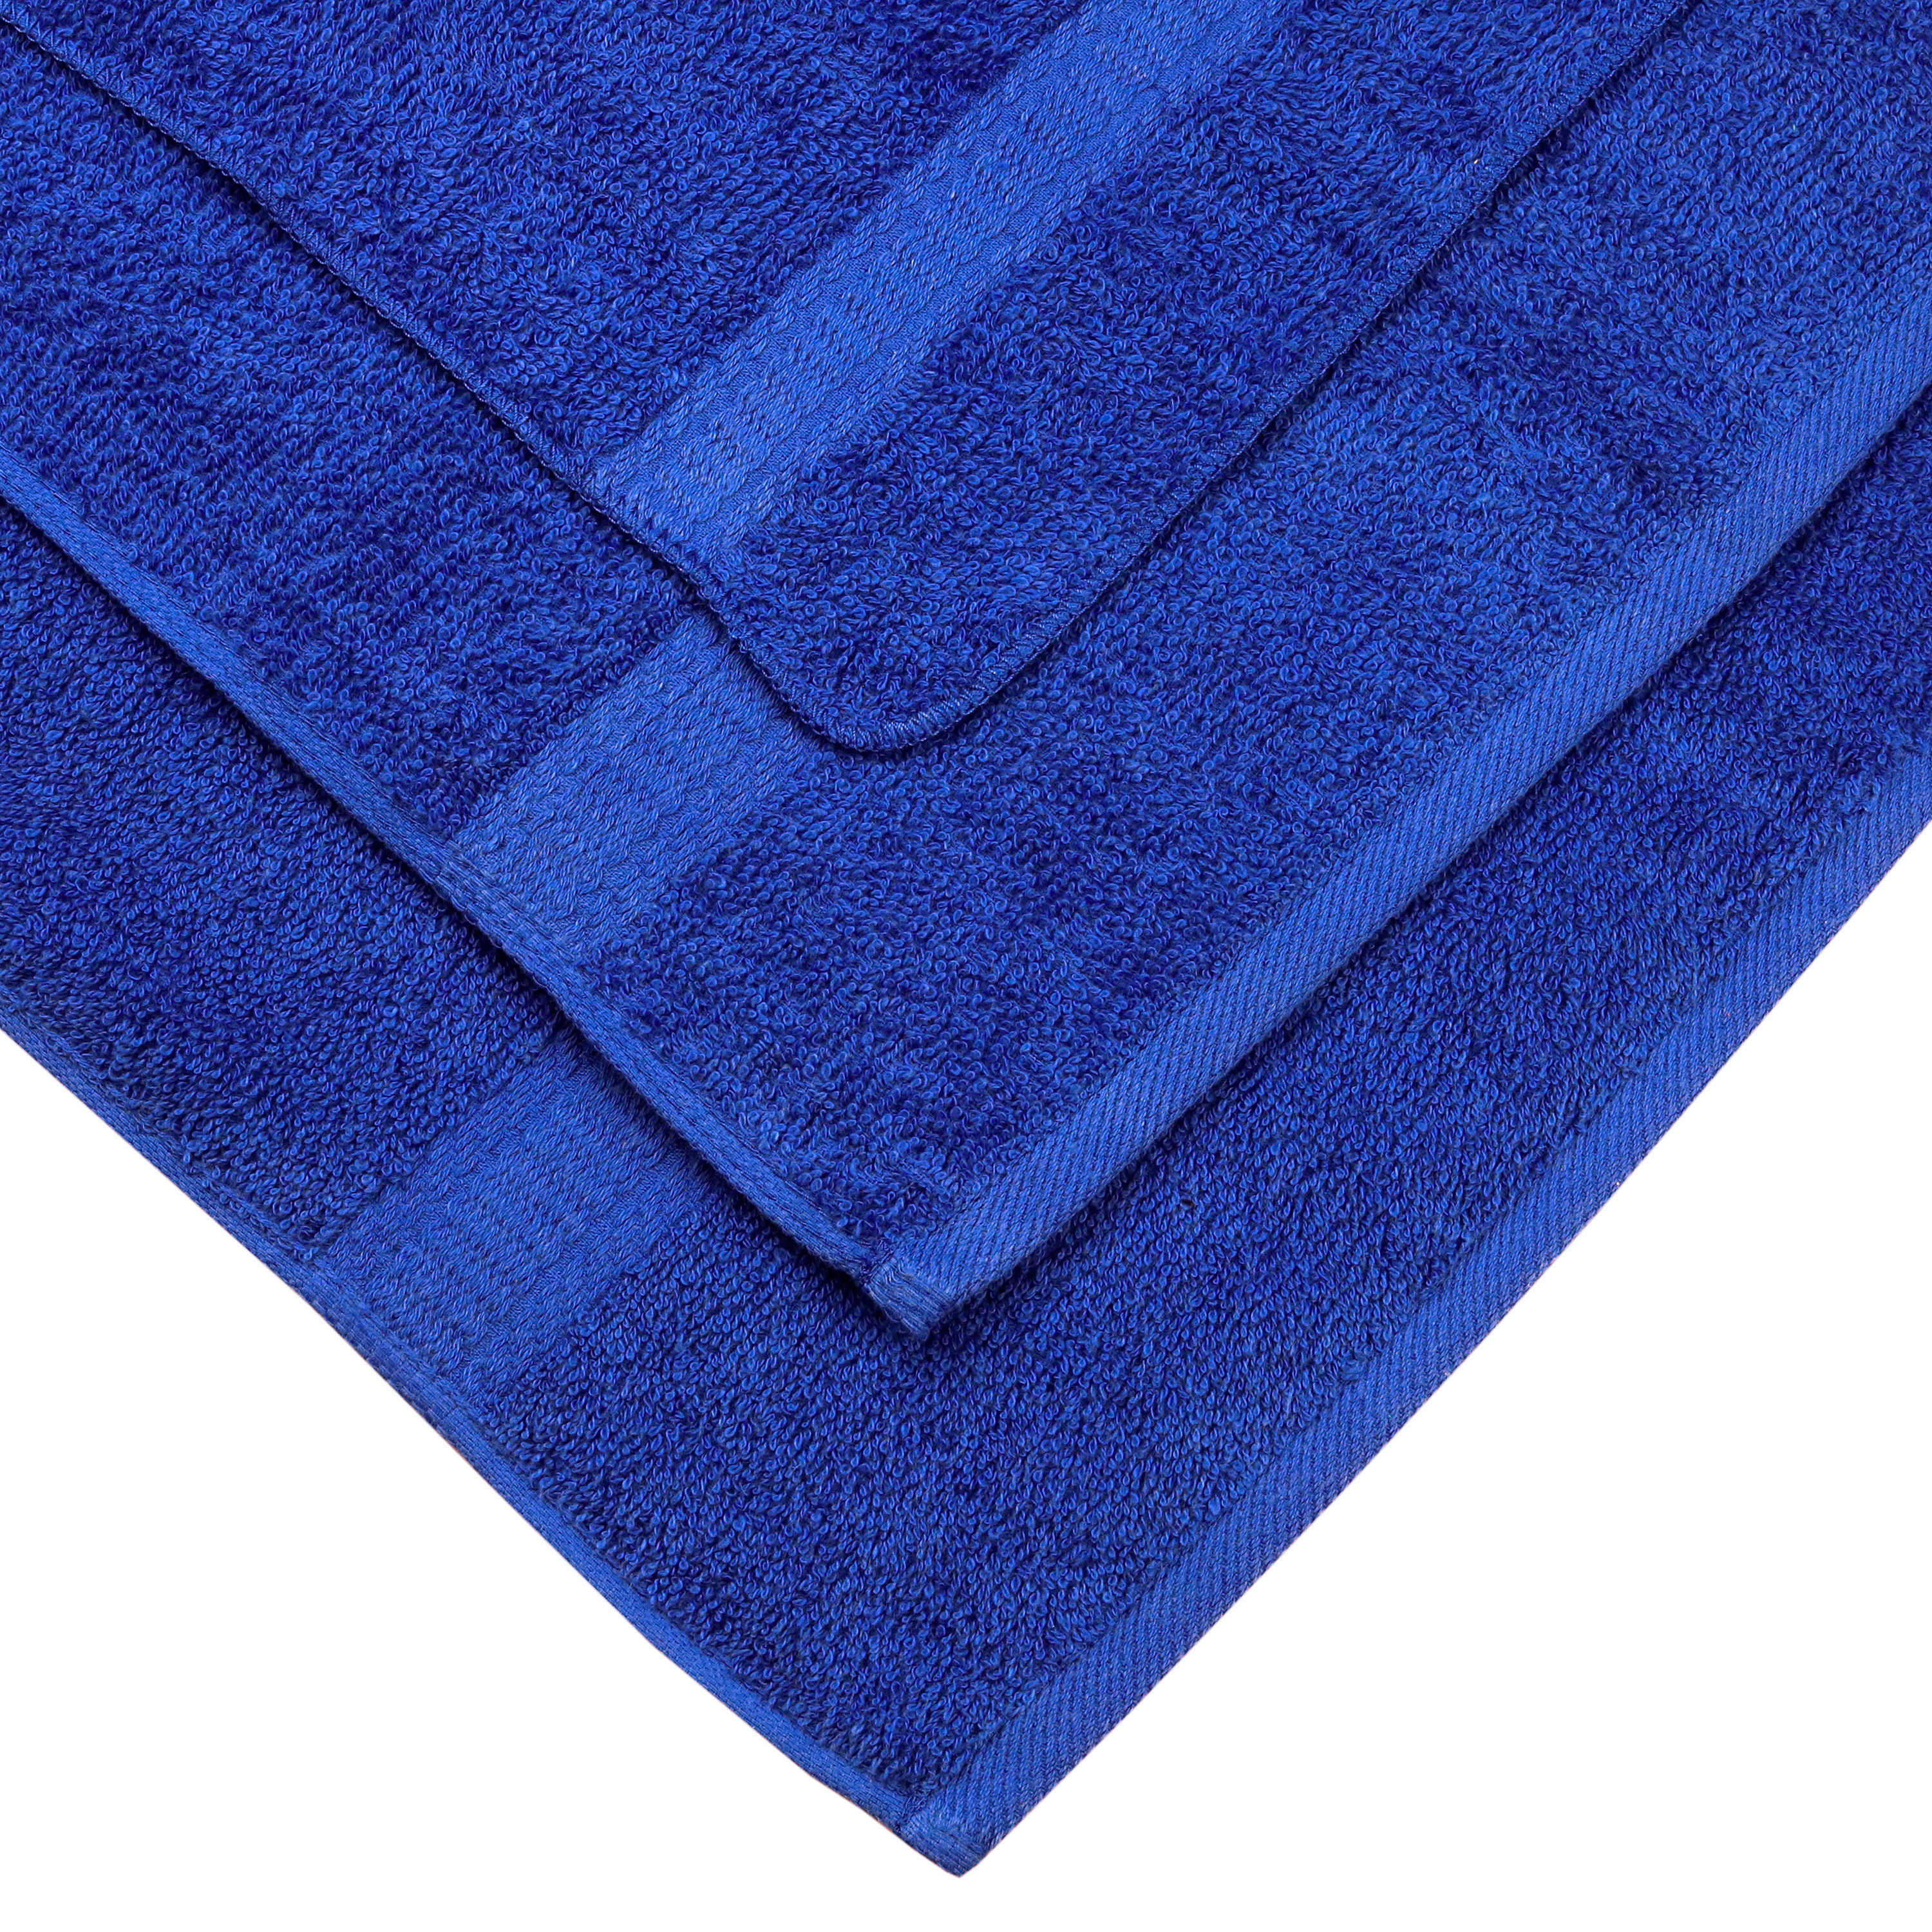 Mainstays Basic Solid 18-Piece Bath Towel Set Collection, Royal Spice - image 3 of 10